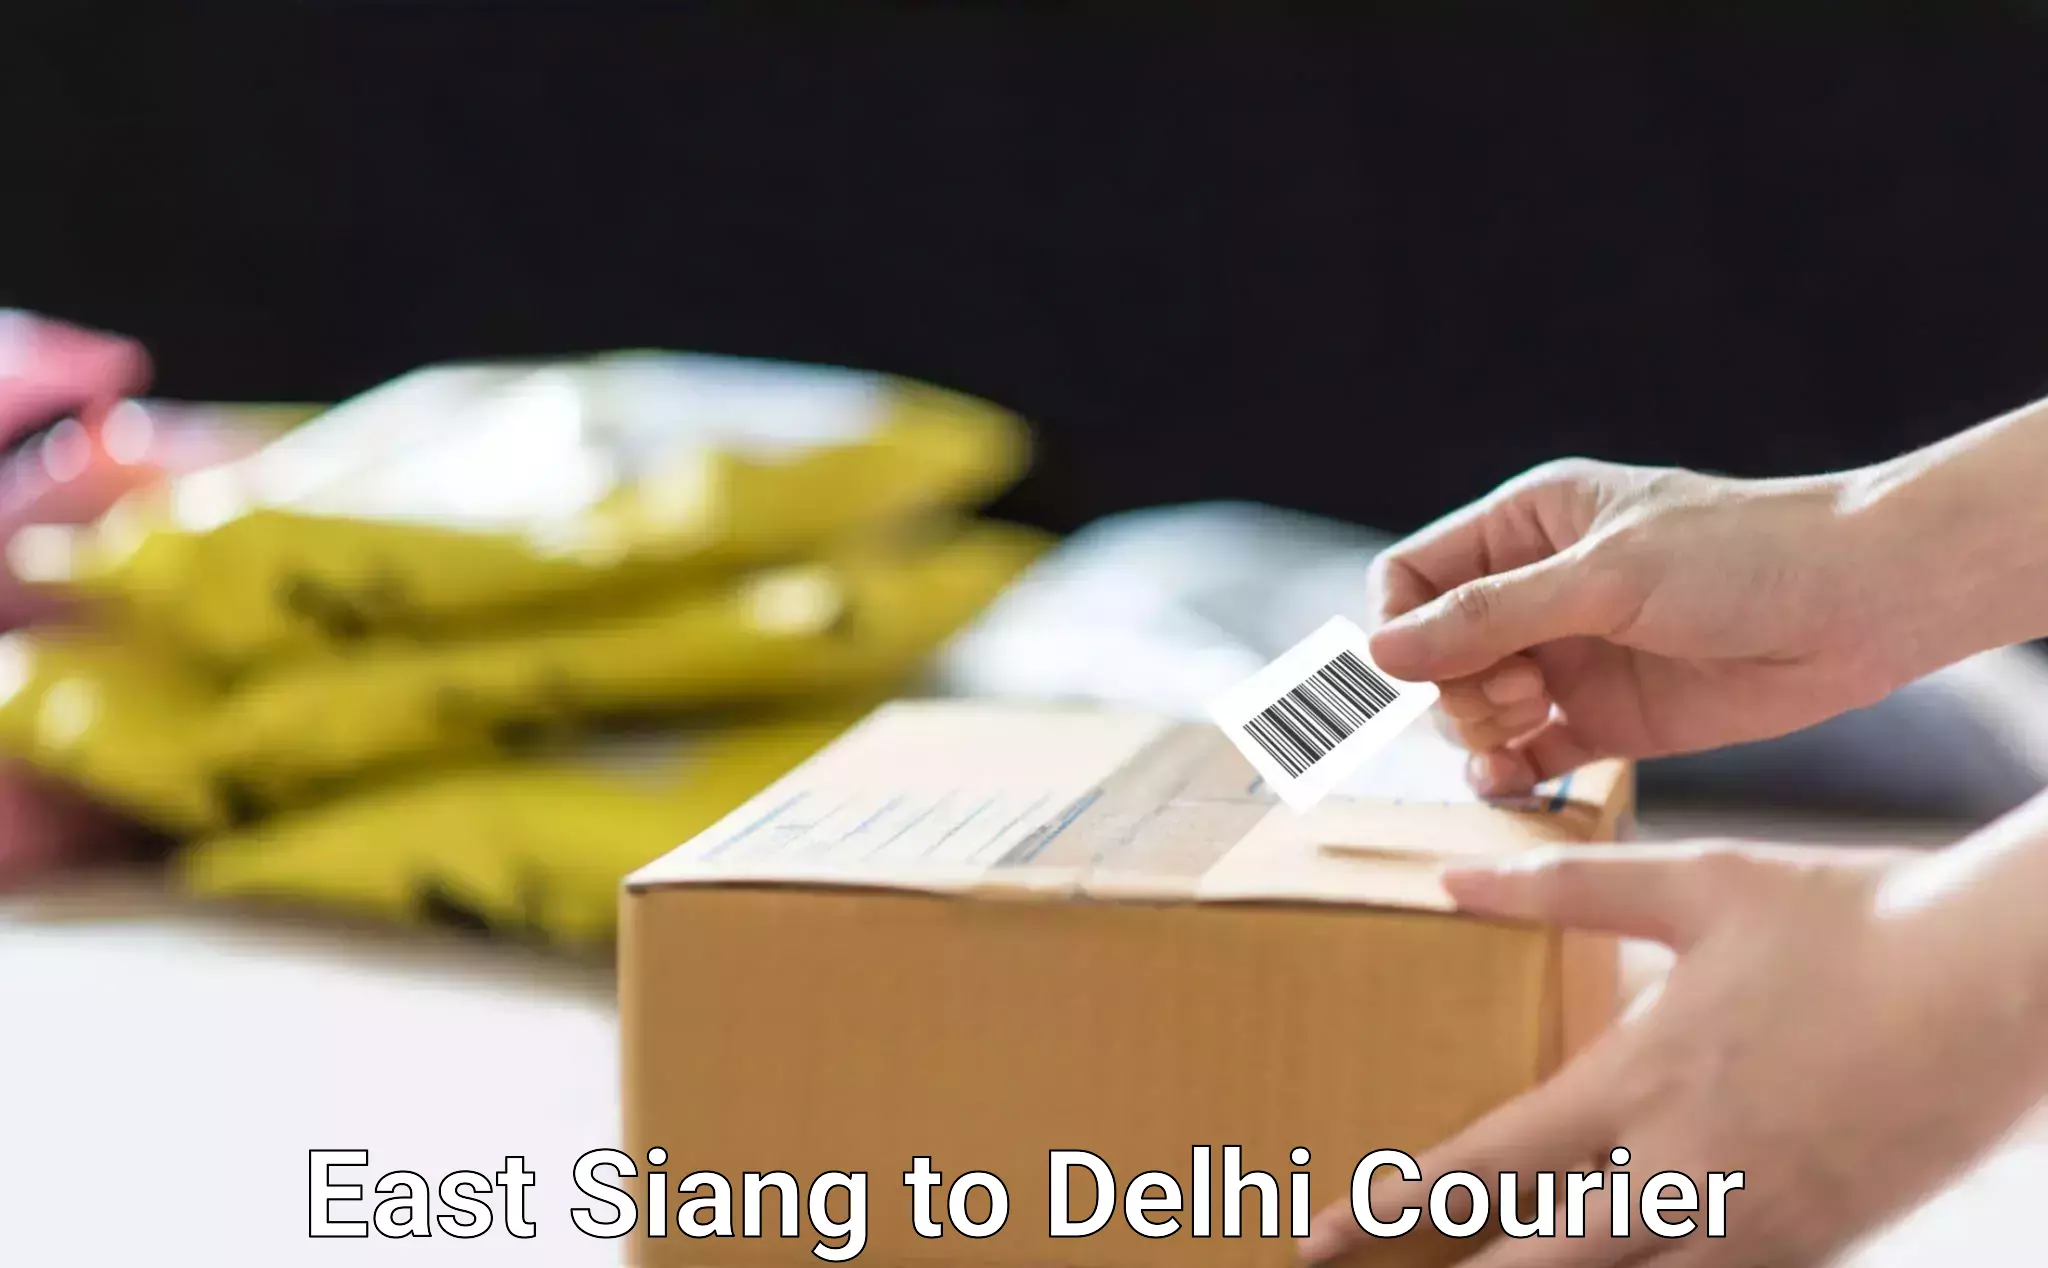 State-of-the-art courier technology East Siang to Delhi